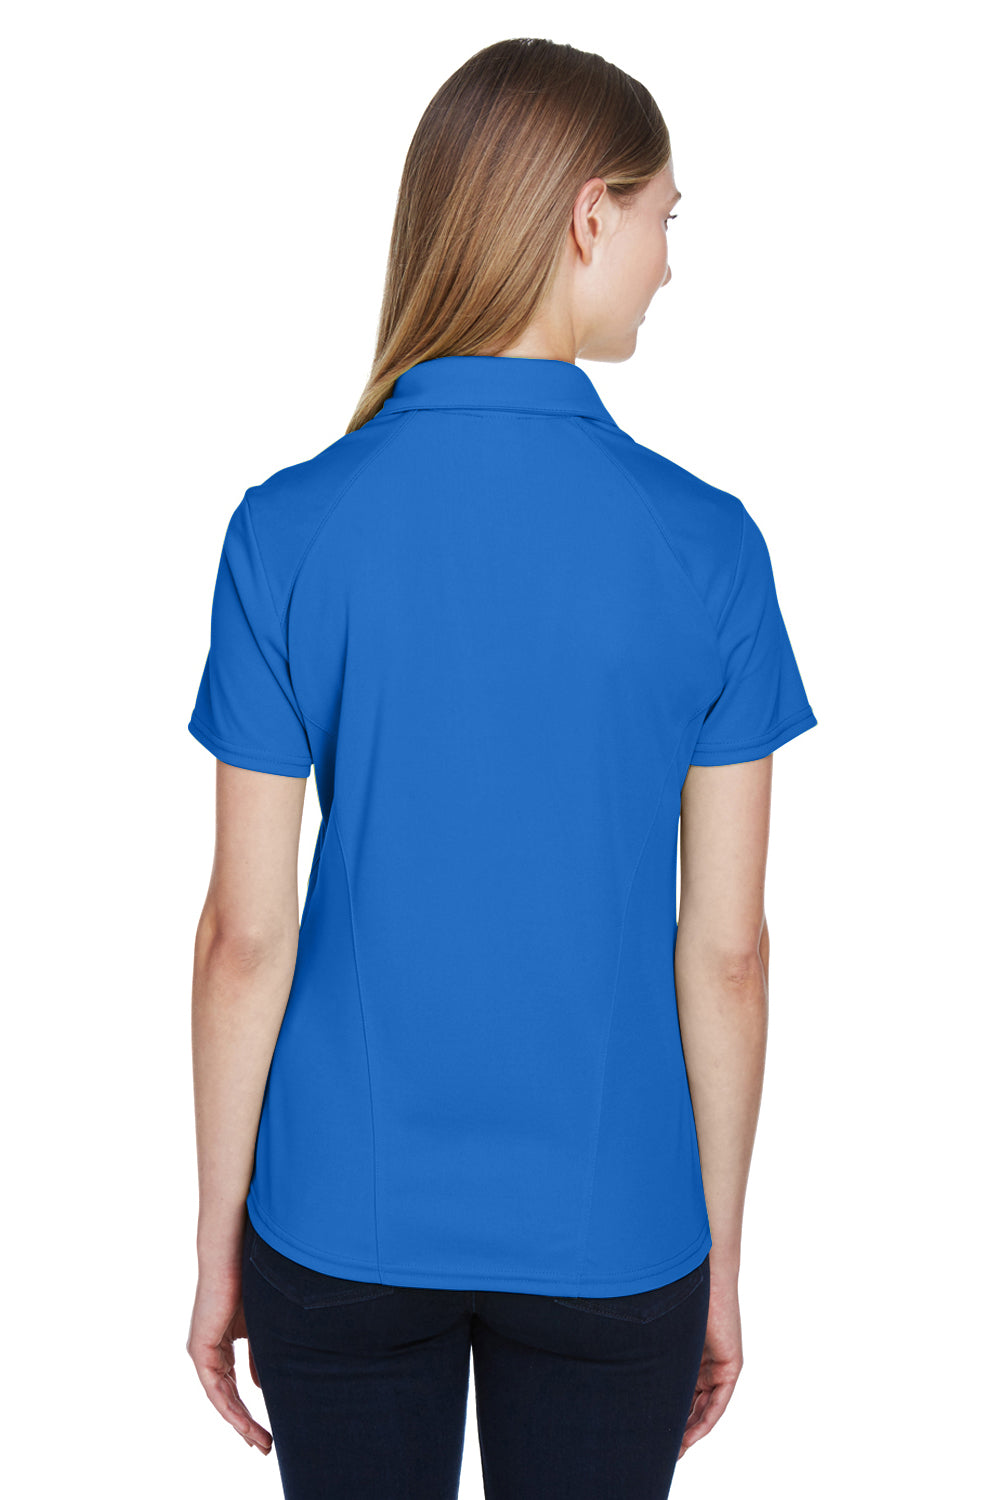 North End 78632 Womens Sport Red Performance Moisture Wicking Short Sleeve Polo Shirt Nautical Blue Back